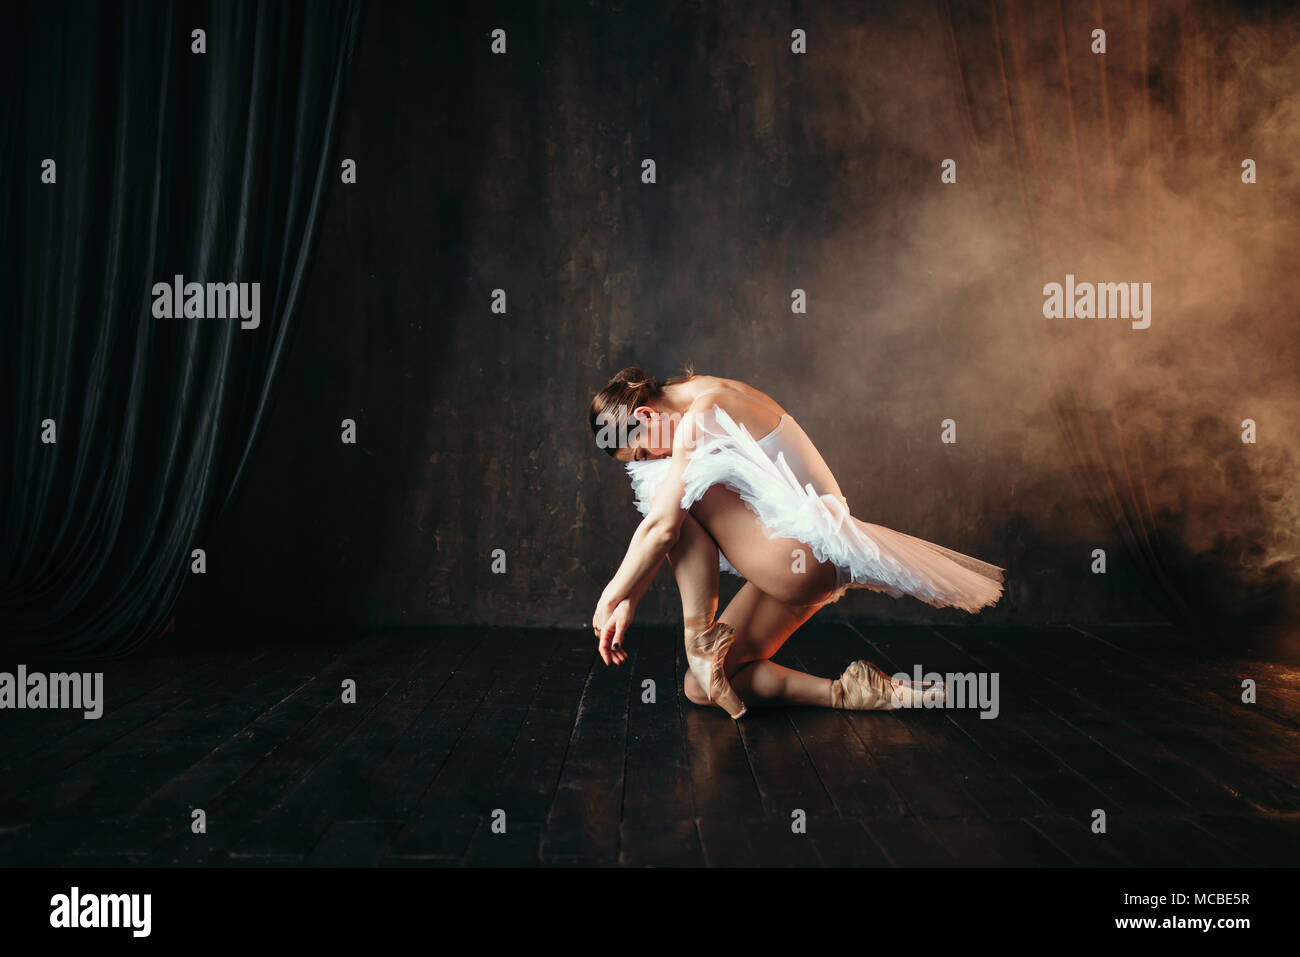 Grace of ballerina in motion on theatrical stage Stock Photo